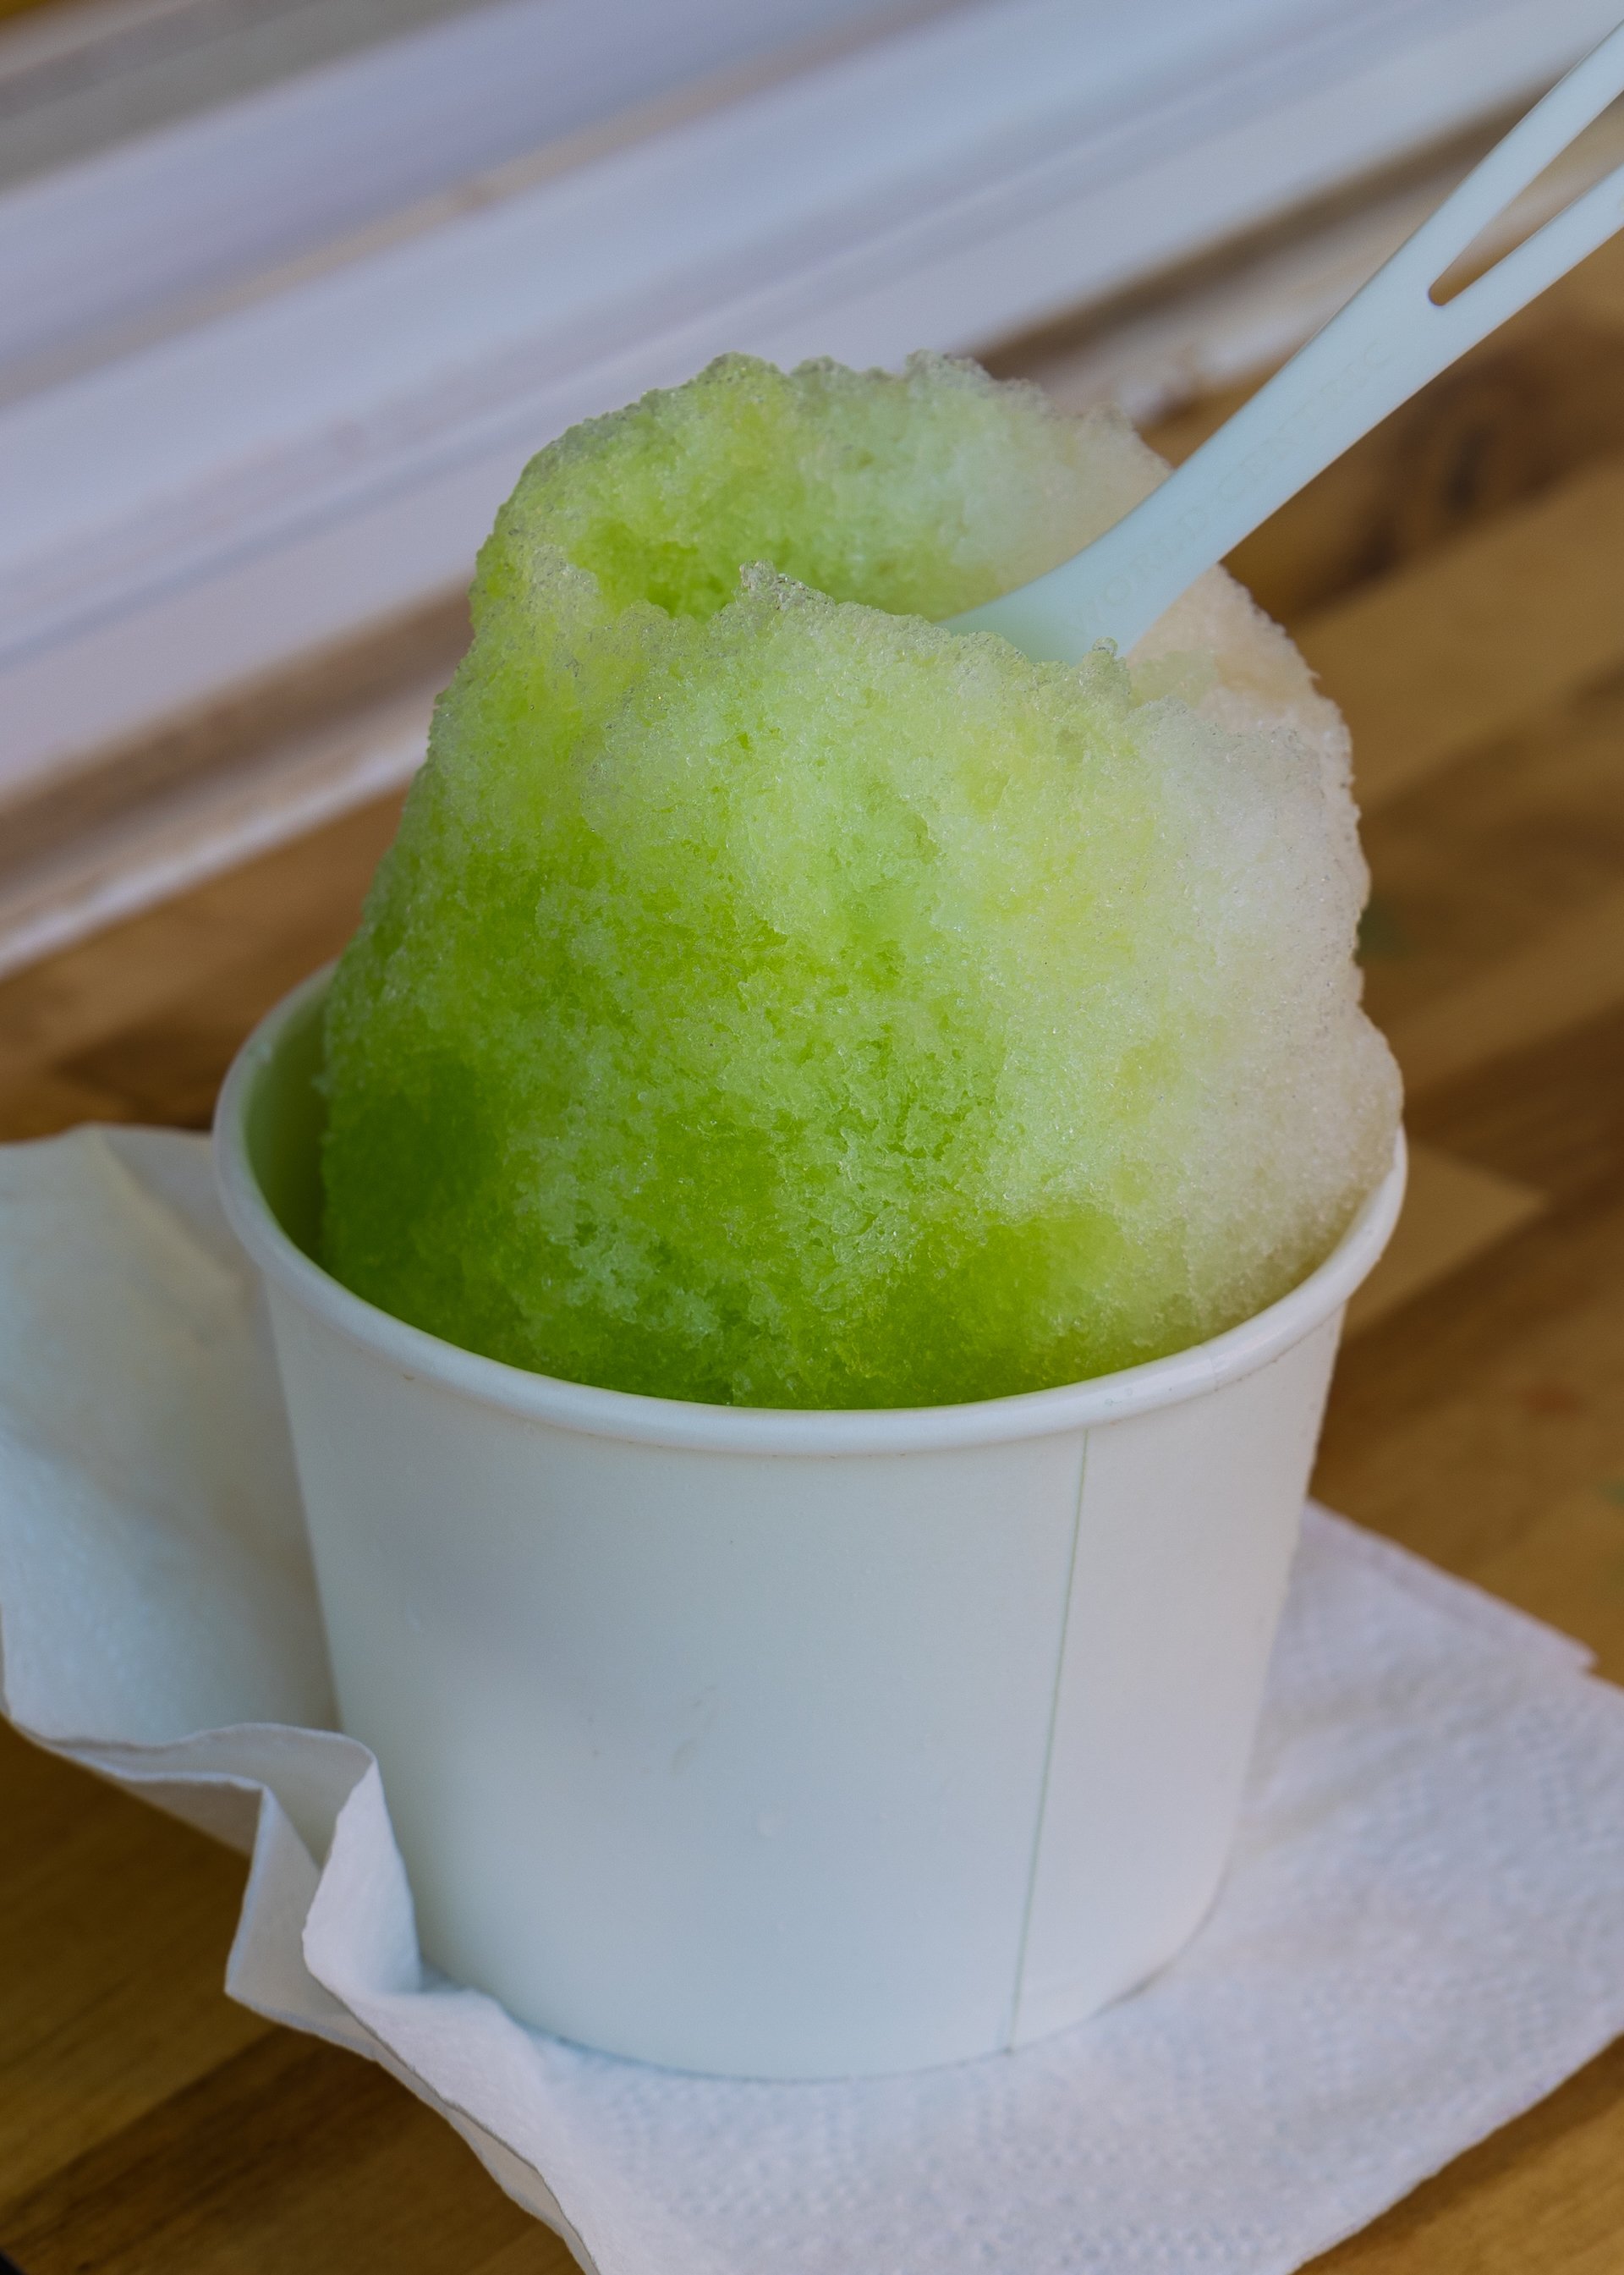  We started with shave ice. I had lychee and lime - it was delicious! 